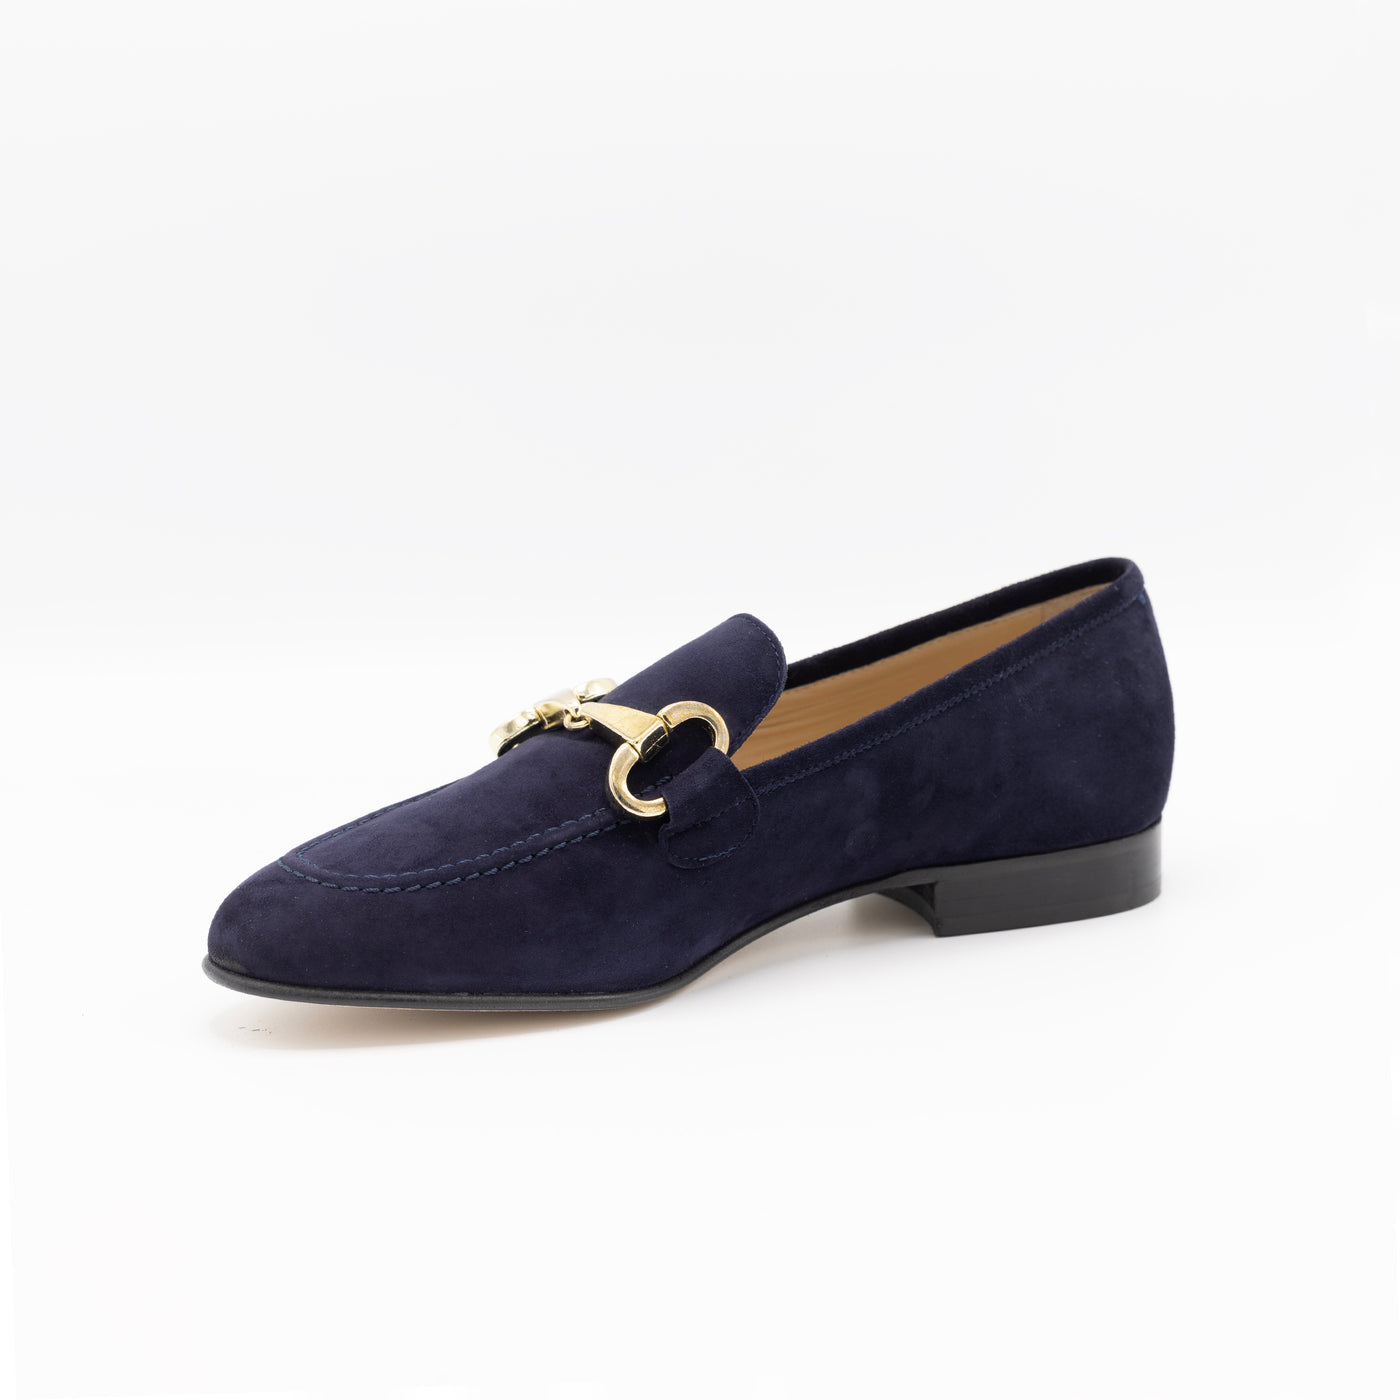 Classic horsebit loafer in navy suede. Set on leather soles and featuring a pale gold horsebit.